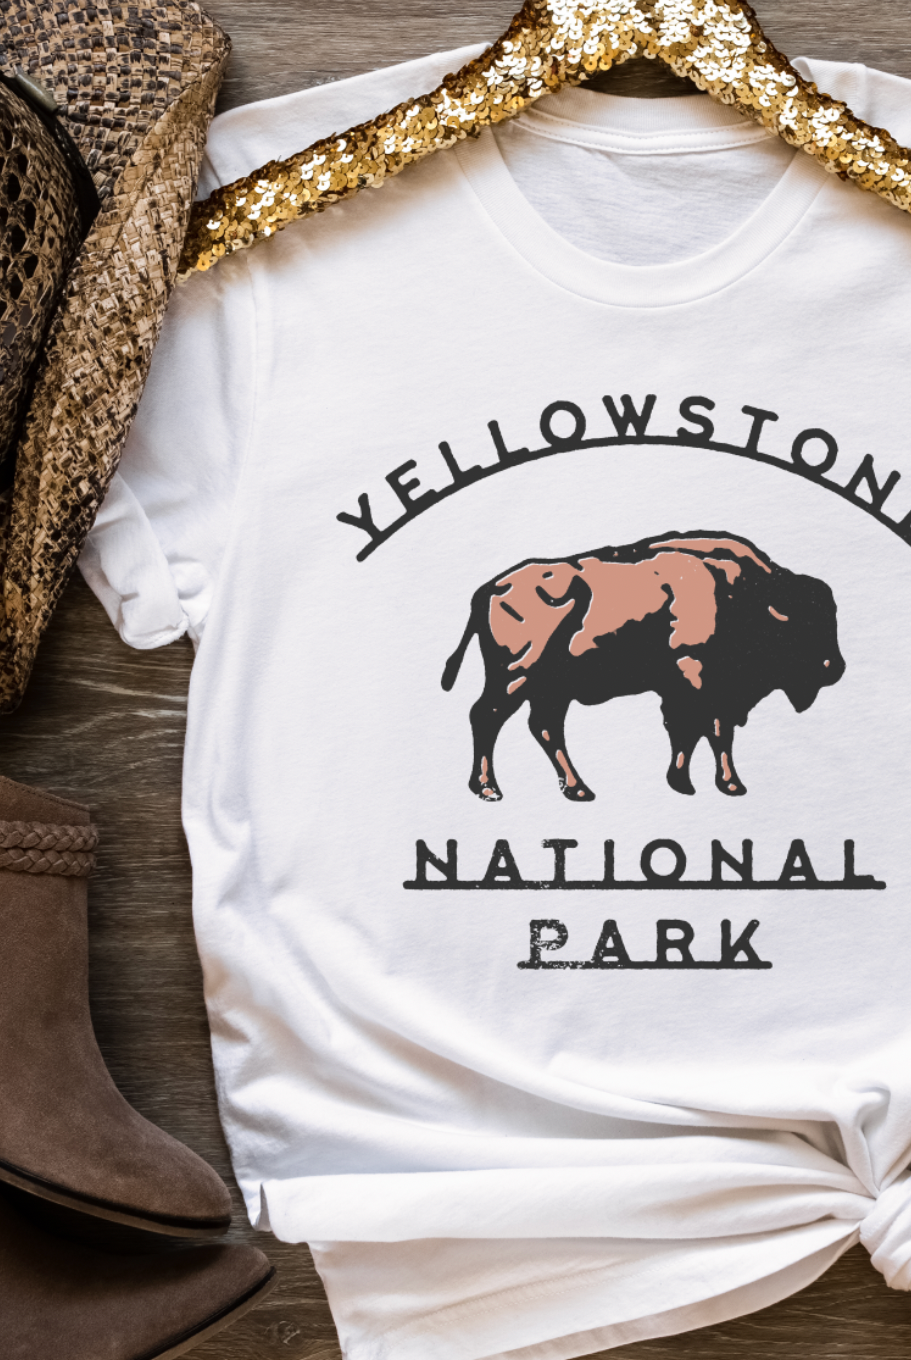 Yellowstone National Park Vintage Country Western Girl Tshirt. Bella and Canvas. Hand made and shipped from Texas. Color is White.